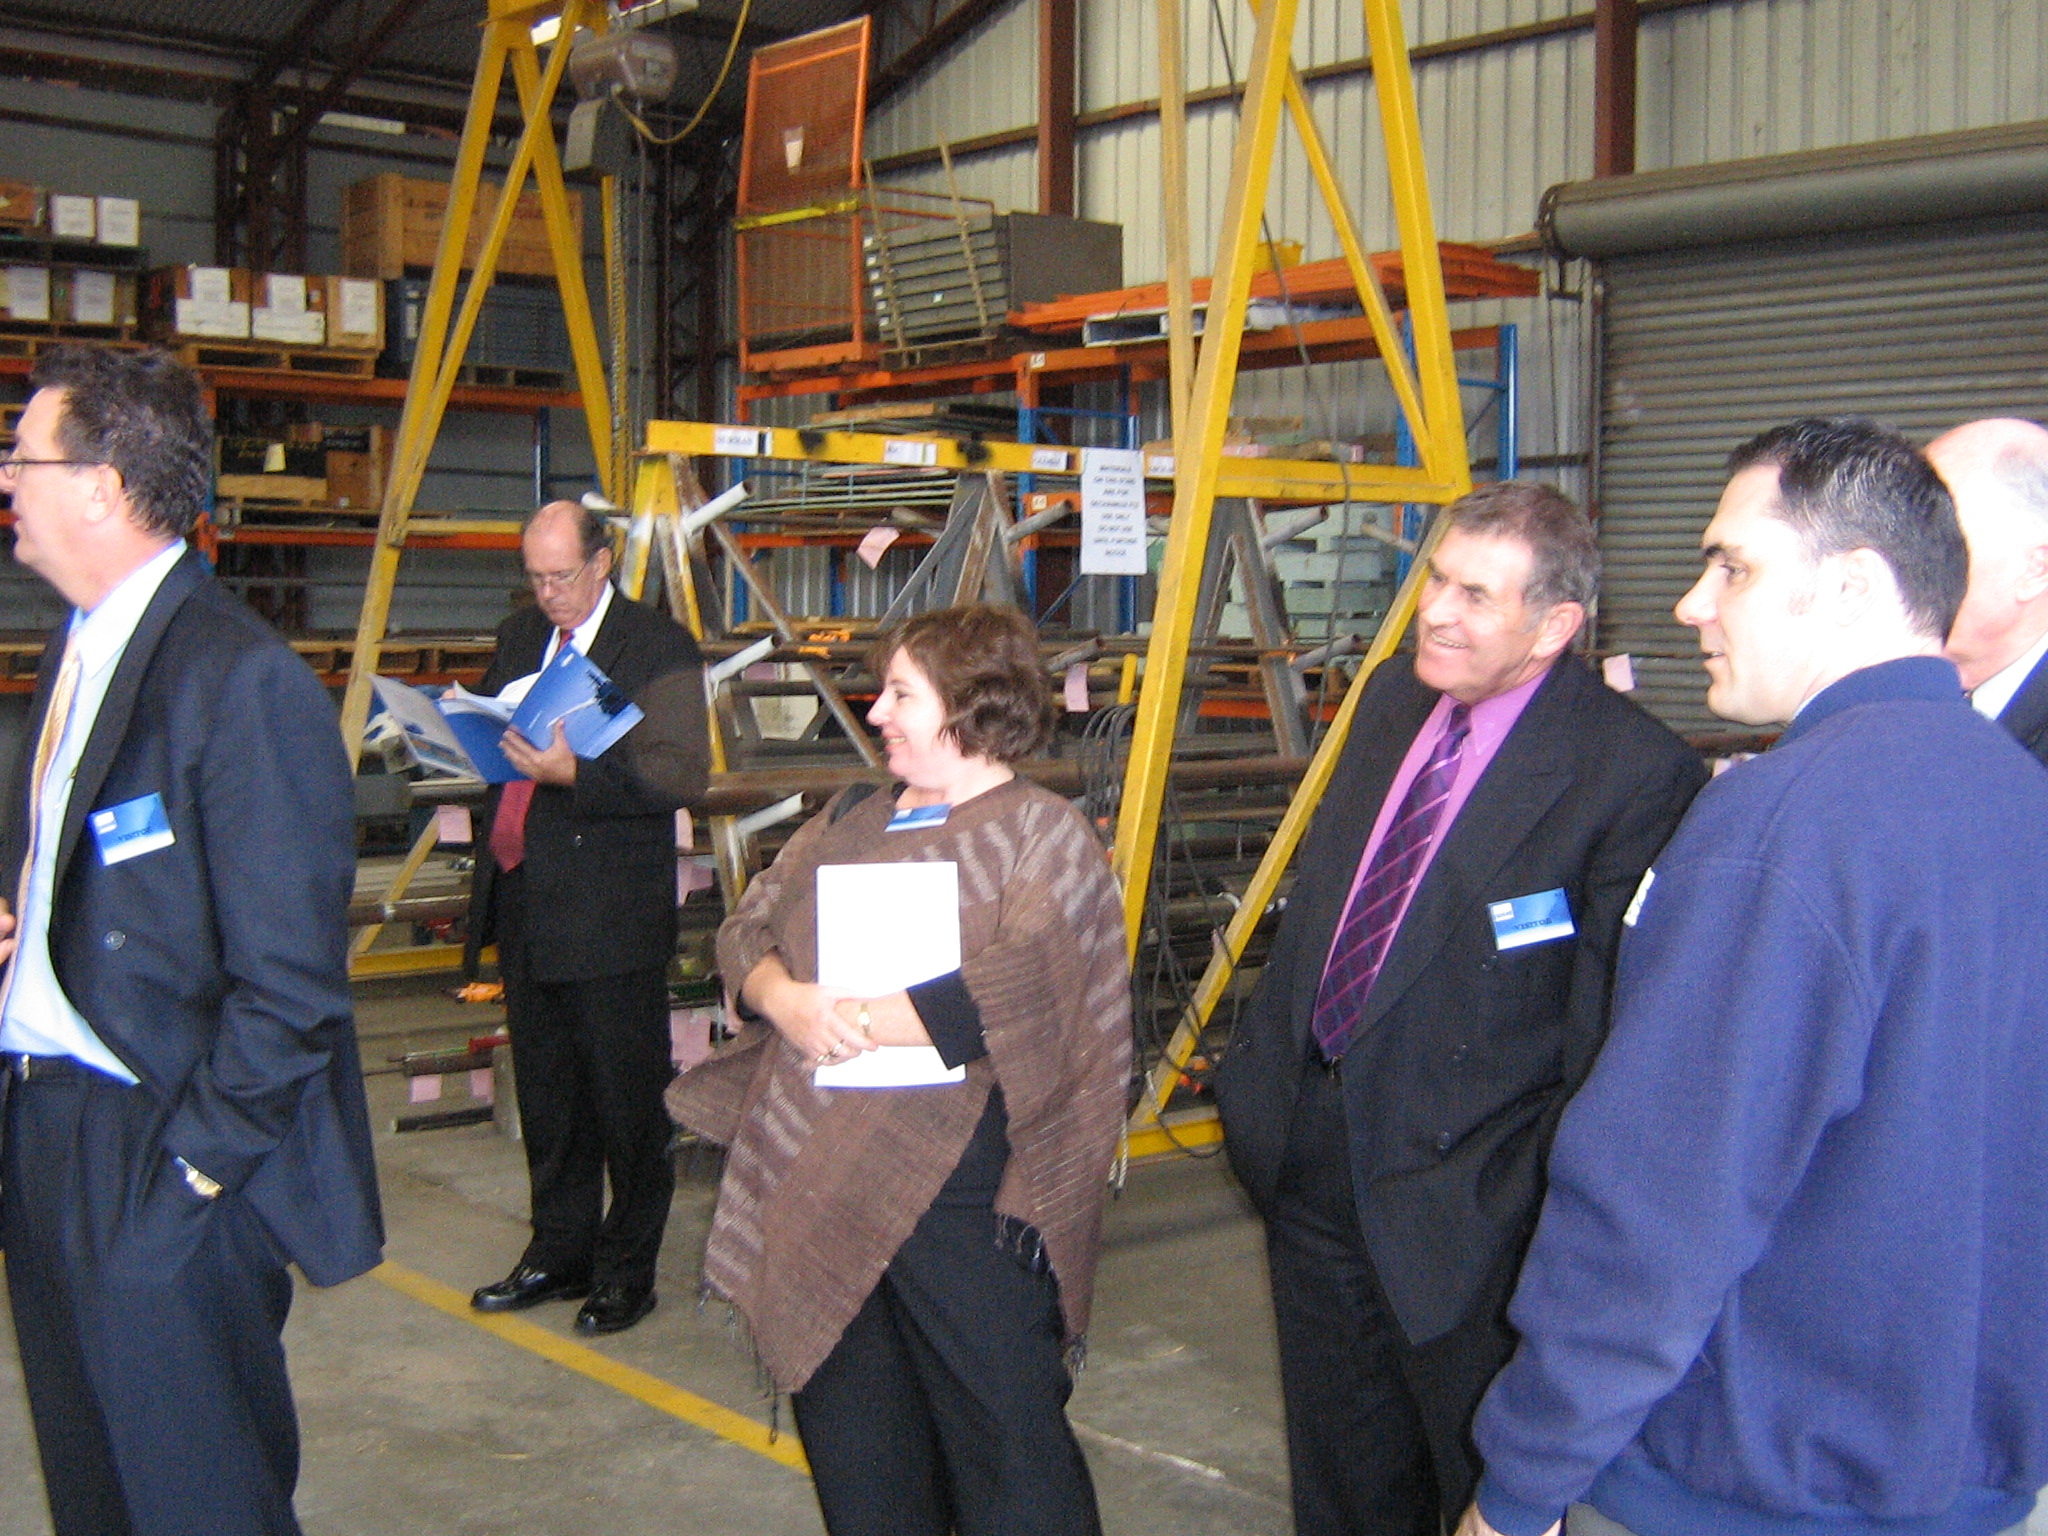 Foreign Affairs Defence and Trade Committee site visit in South Australia, 20 April 2006. Includes Senators Mark Bishop and David Johnston (left).